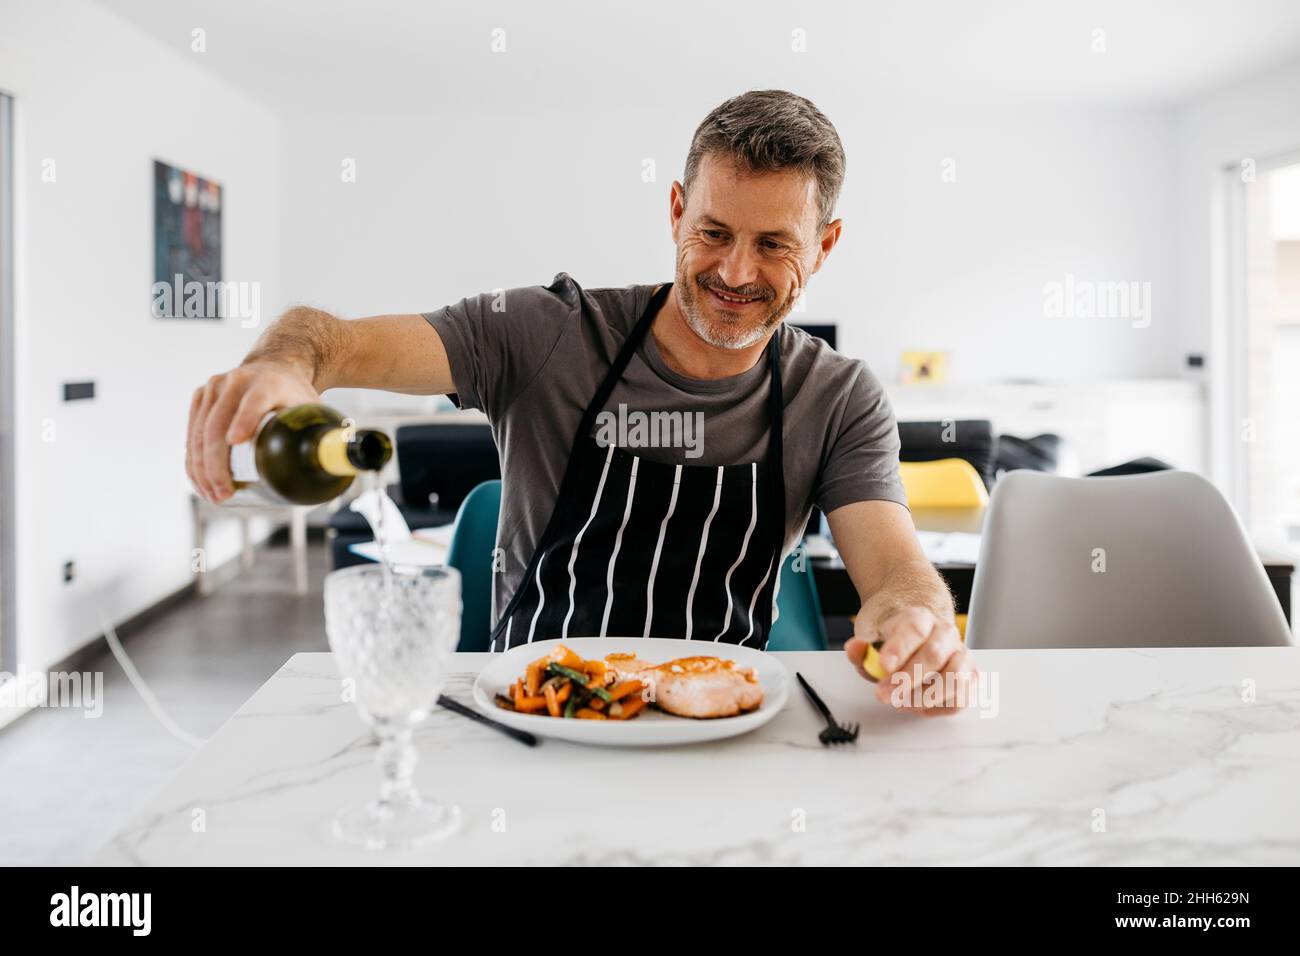 Smiling man pouring wine in glass by meal at table Stock Photo